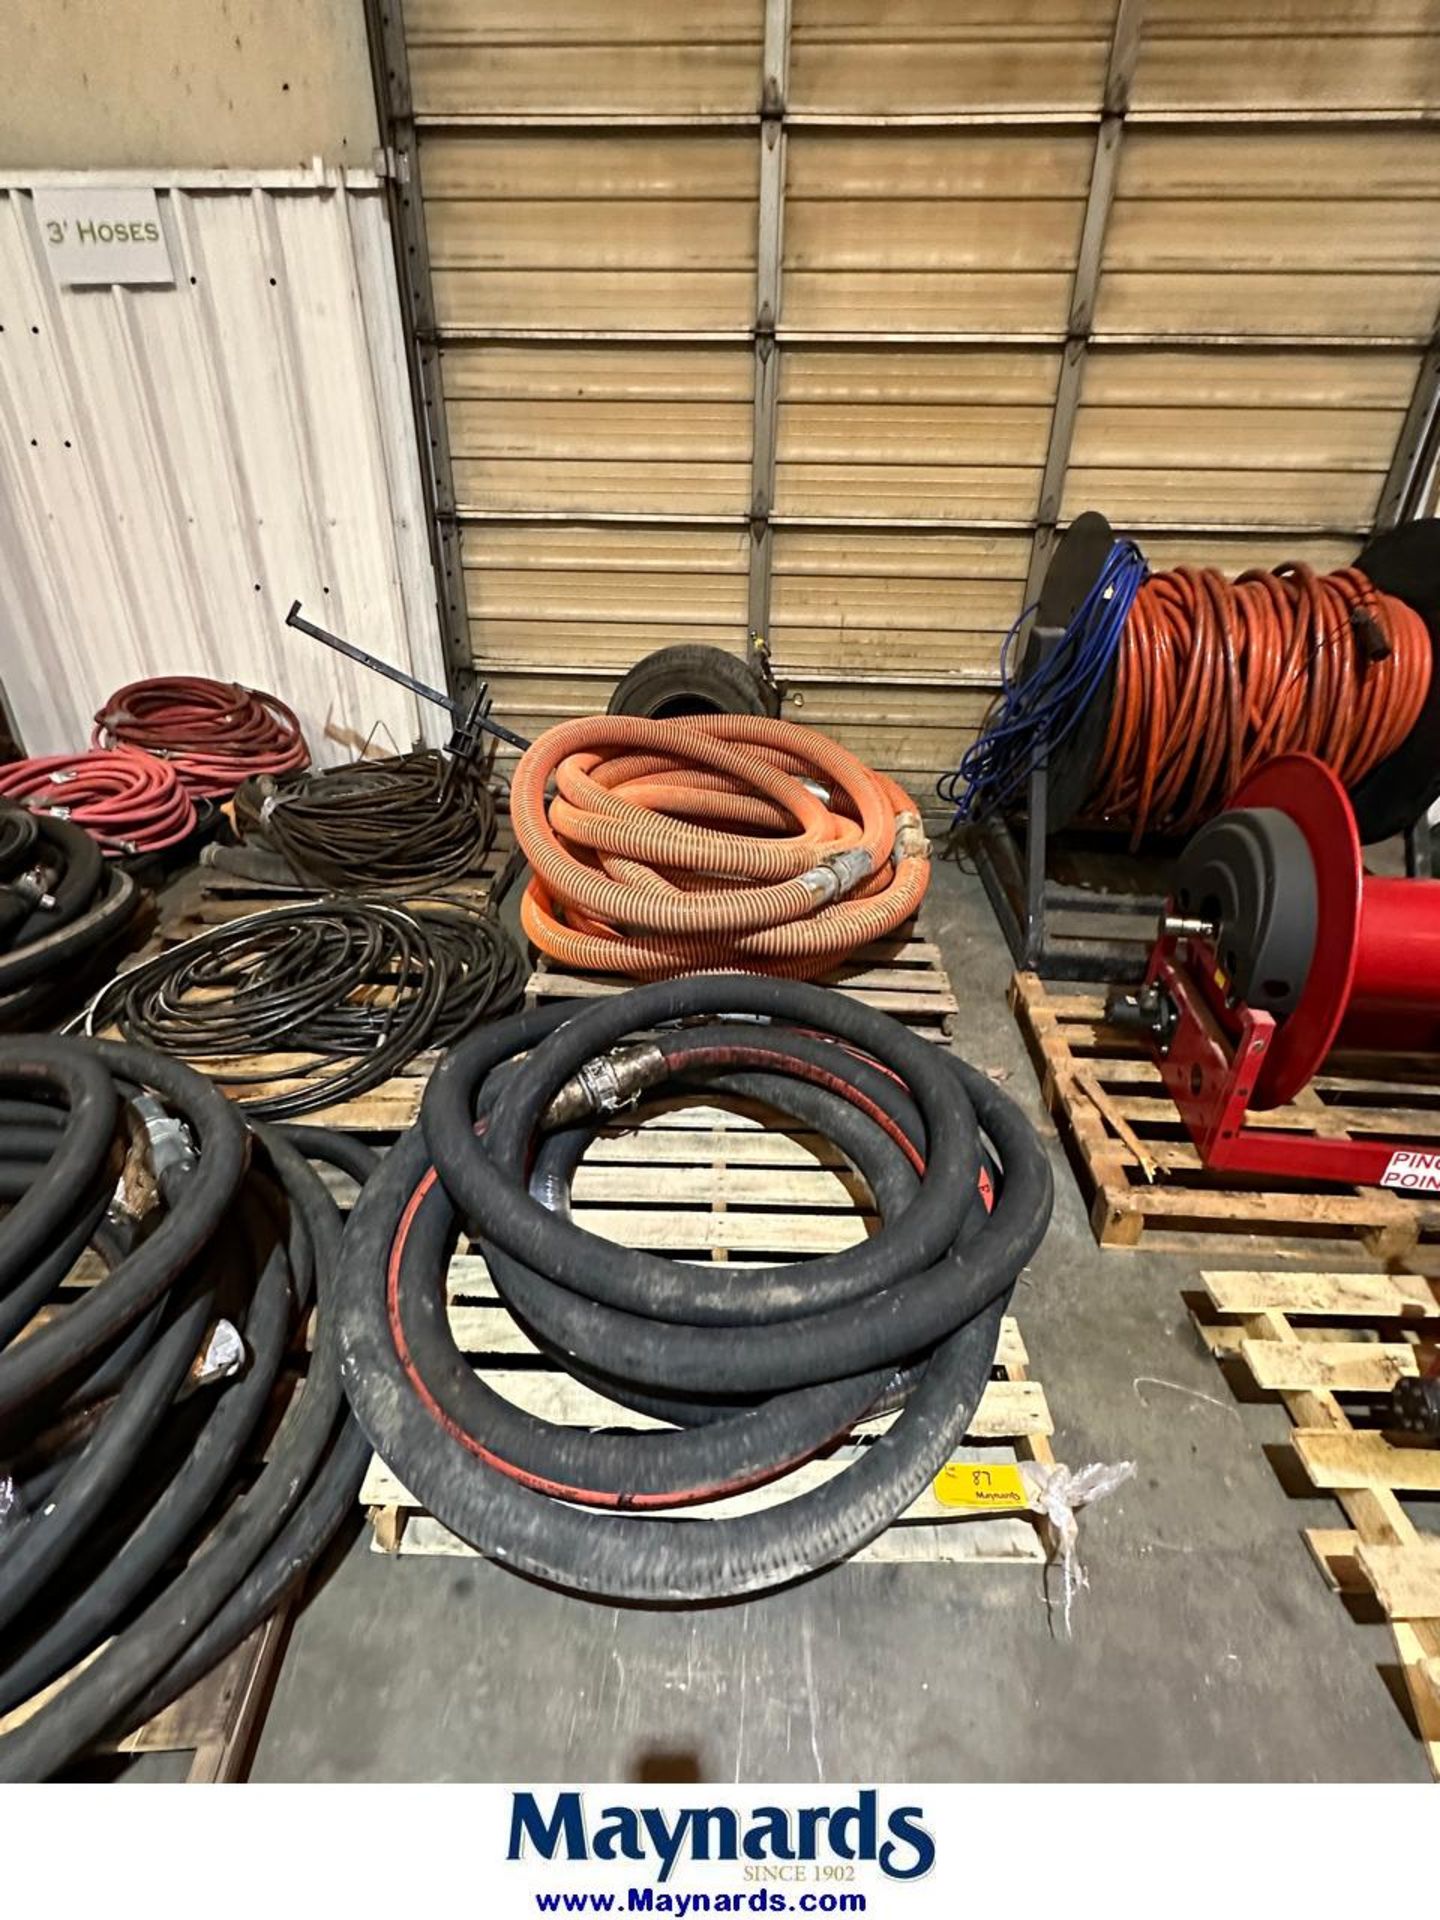 Lot of Hoses and Rack - Image 6 of 6